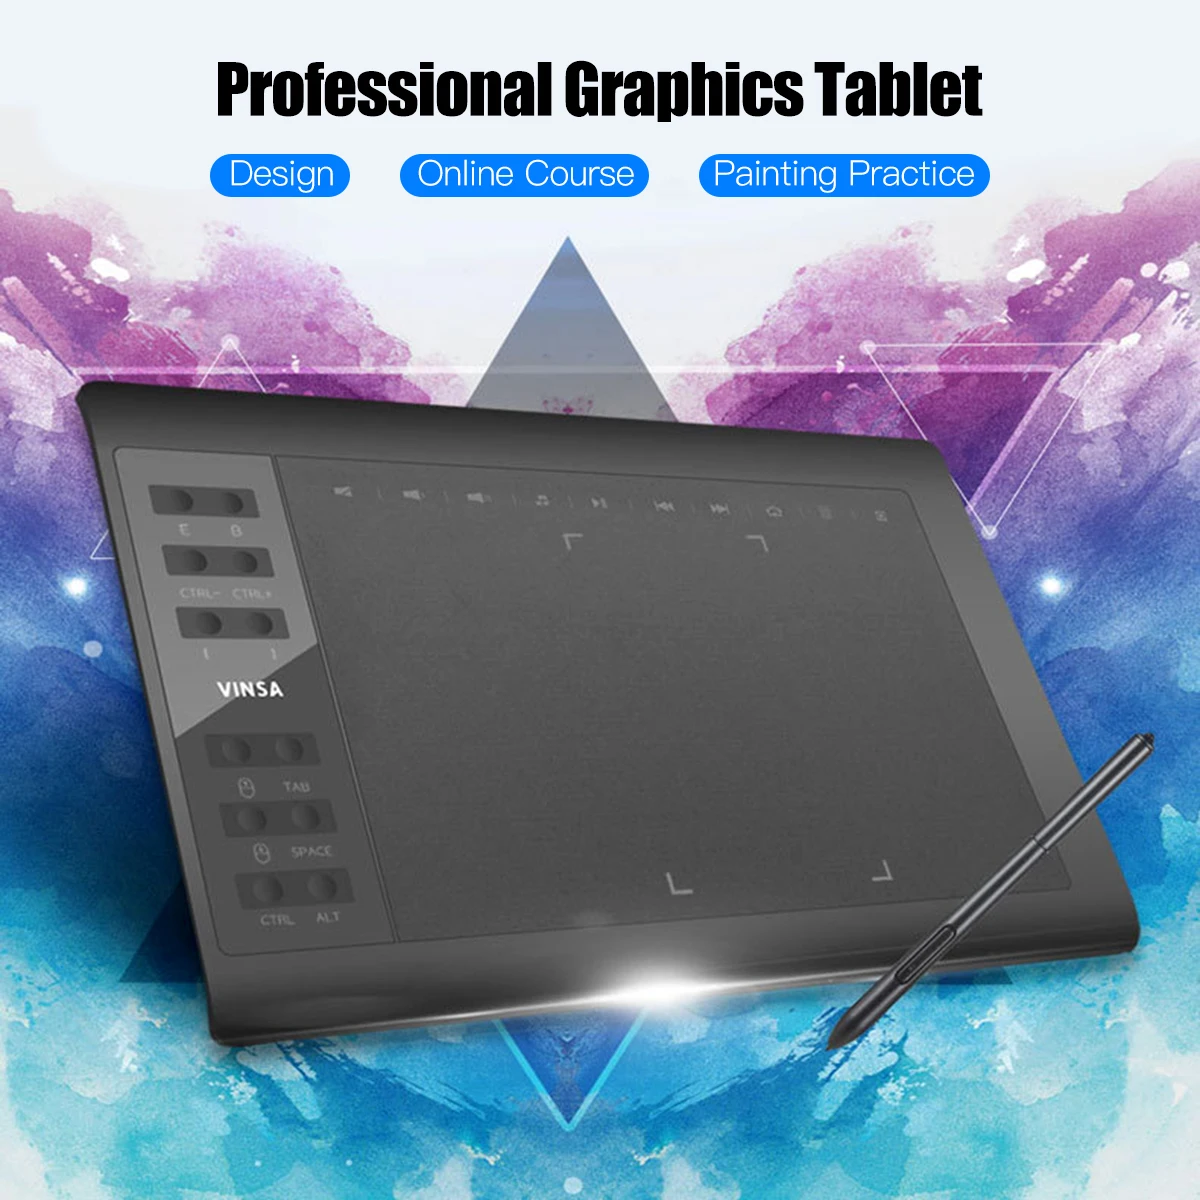 

Professional Graphics Drawing Tablet 10x6 Inch 12 Express Keys 8192 Levels Battery-Free Stylus Nibs/Pen Clip Support PC/Laptop